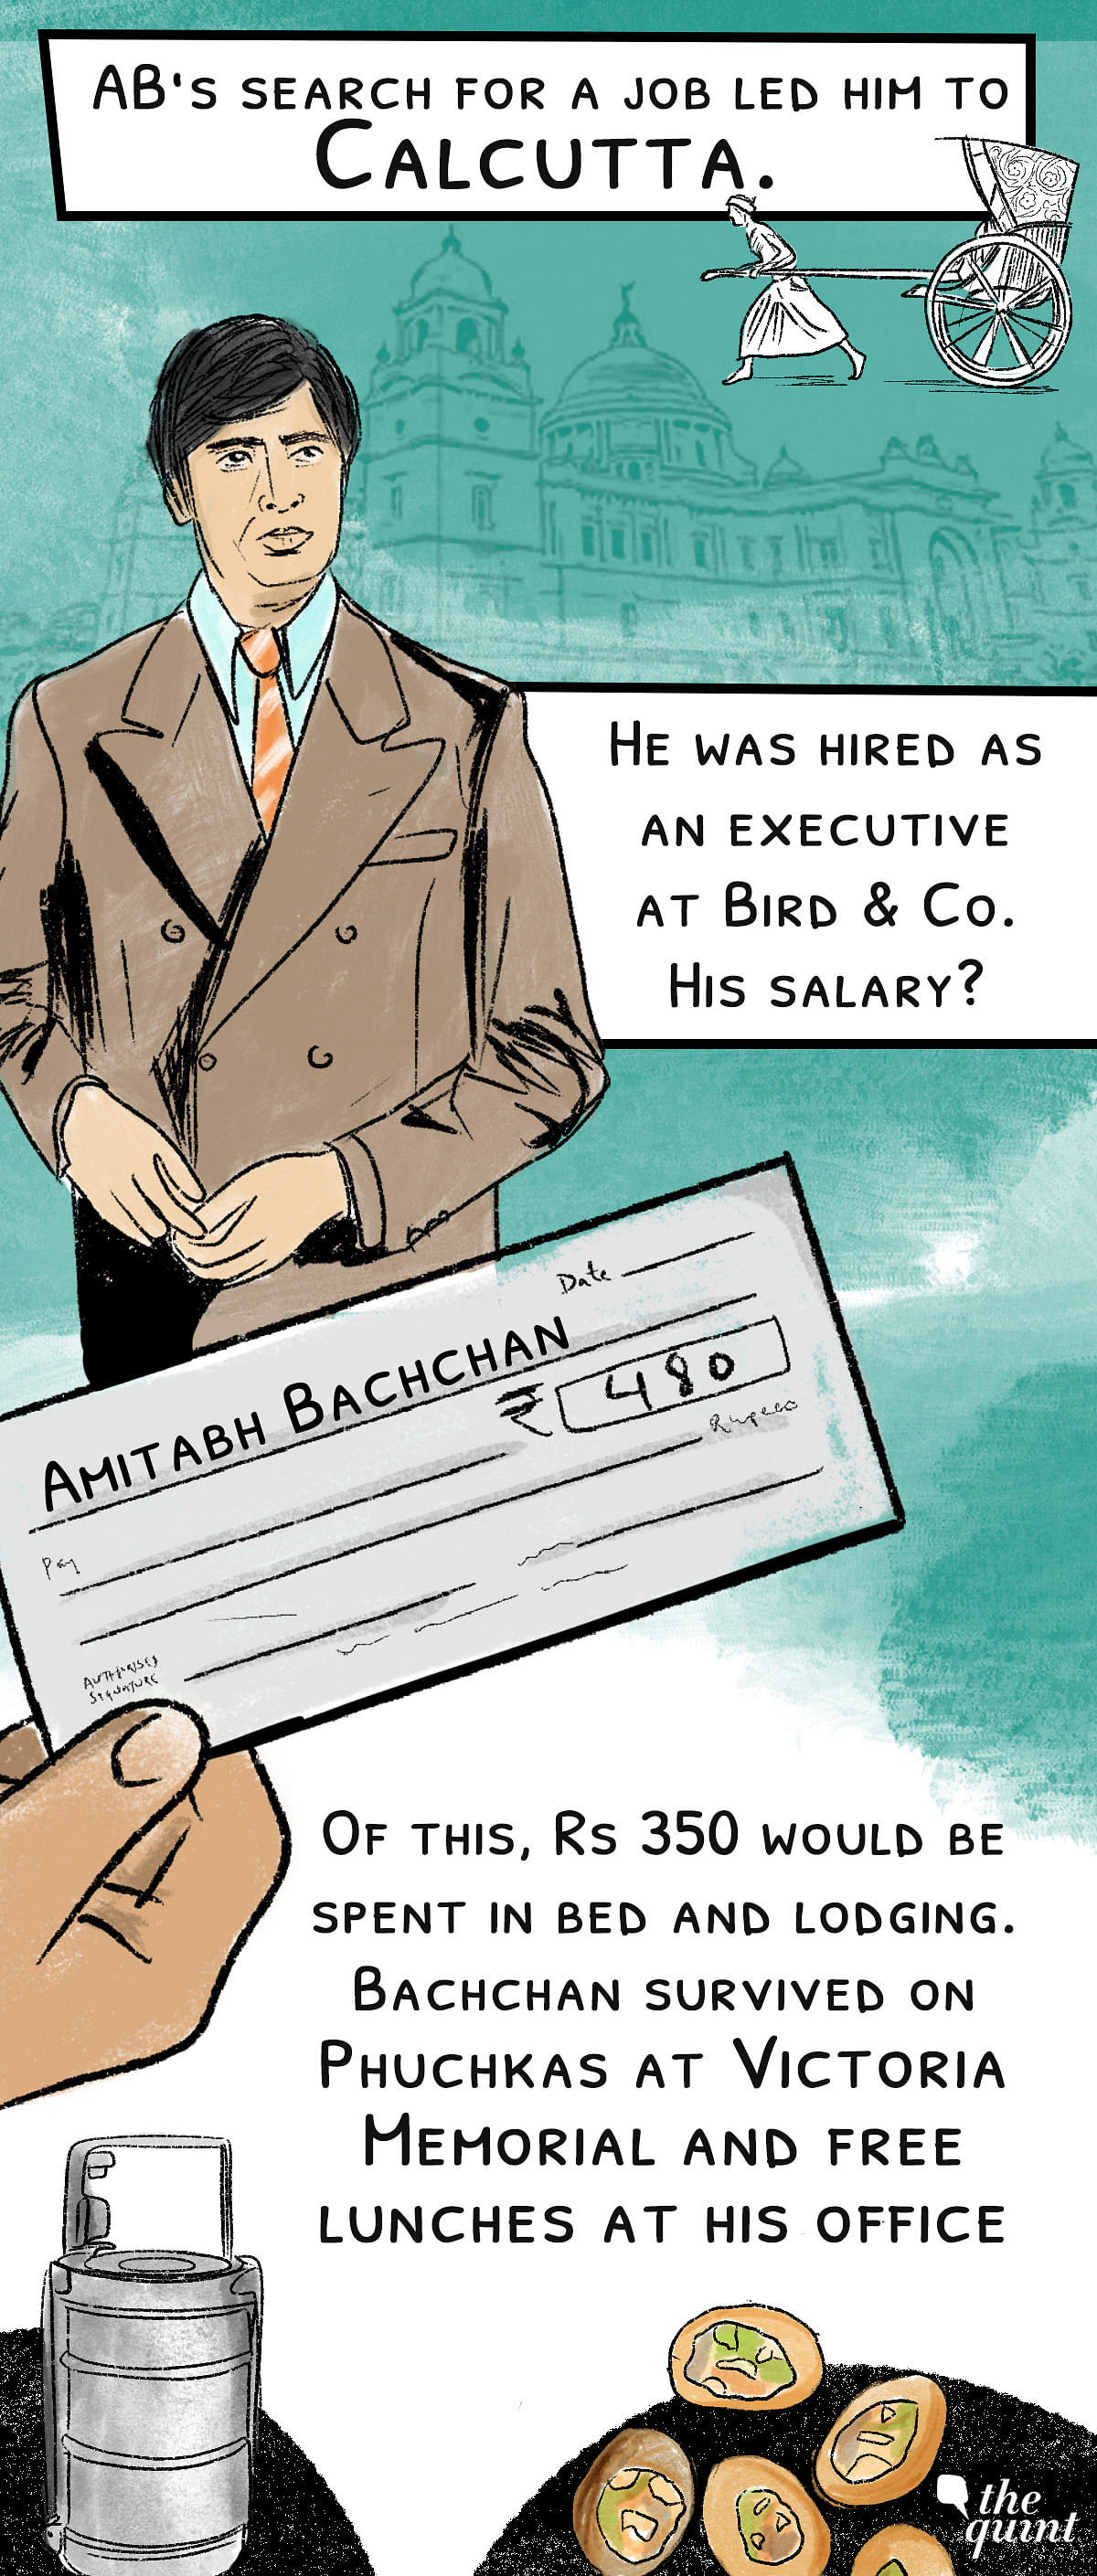 Amitabh Bachchan’s anecdotes as told by himself in his blogs. 